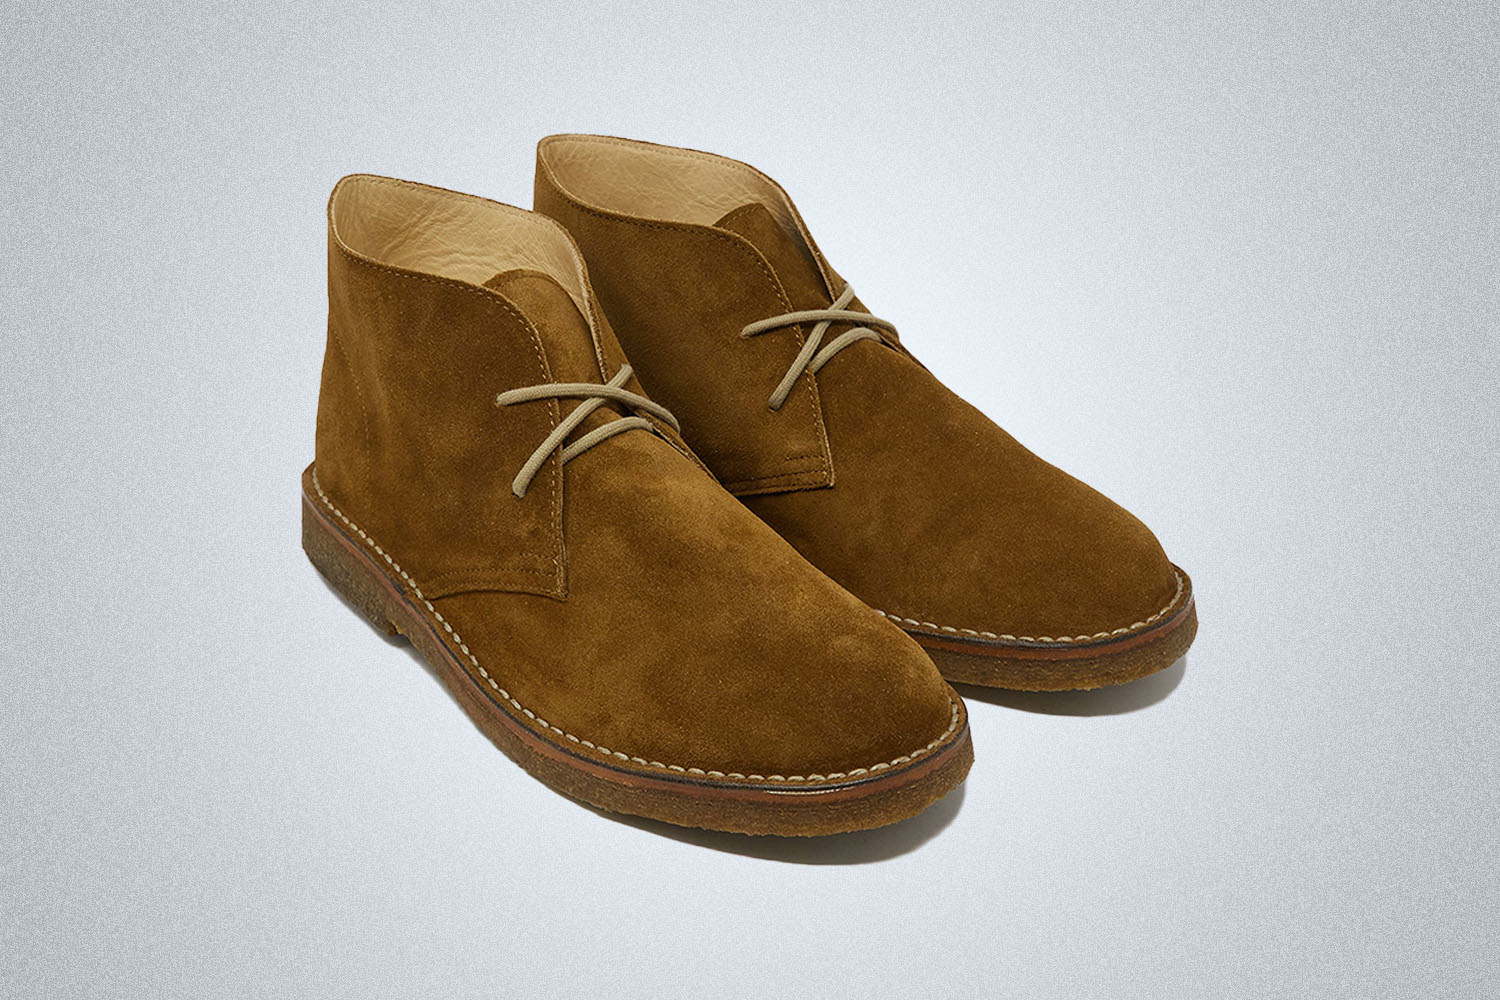 A pair of Chukka Boots from Todd Snyder on a grey background